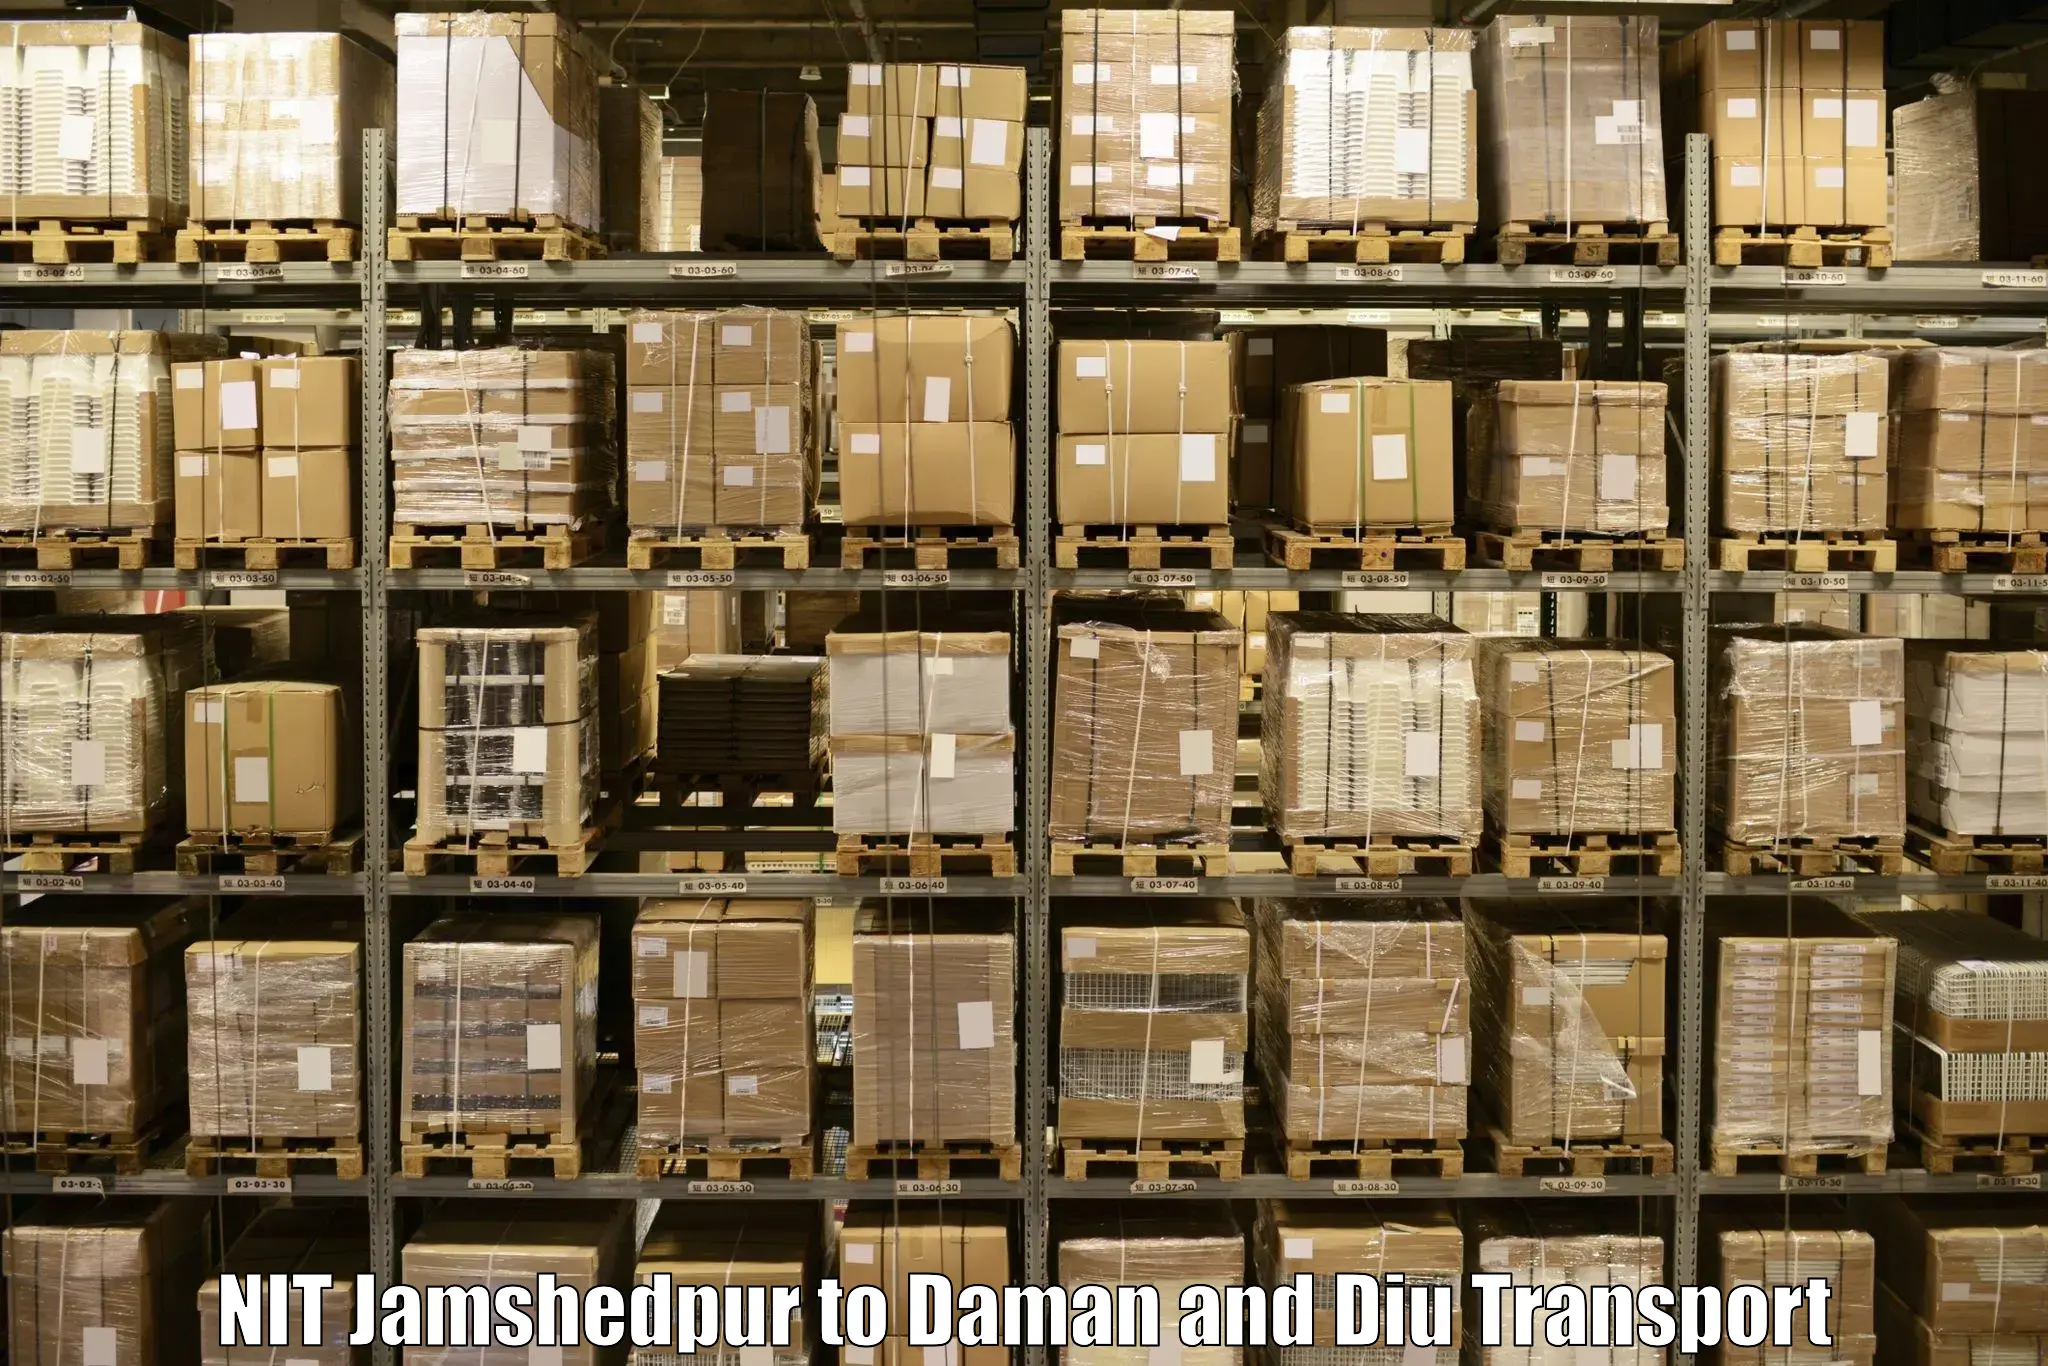 Truck transport companies in India NIT Jamshedpur to Daman and Diu